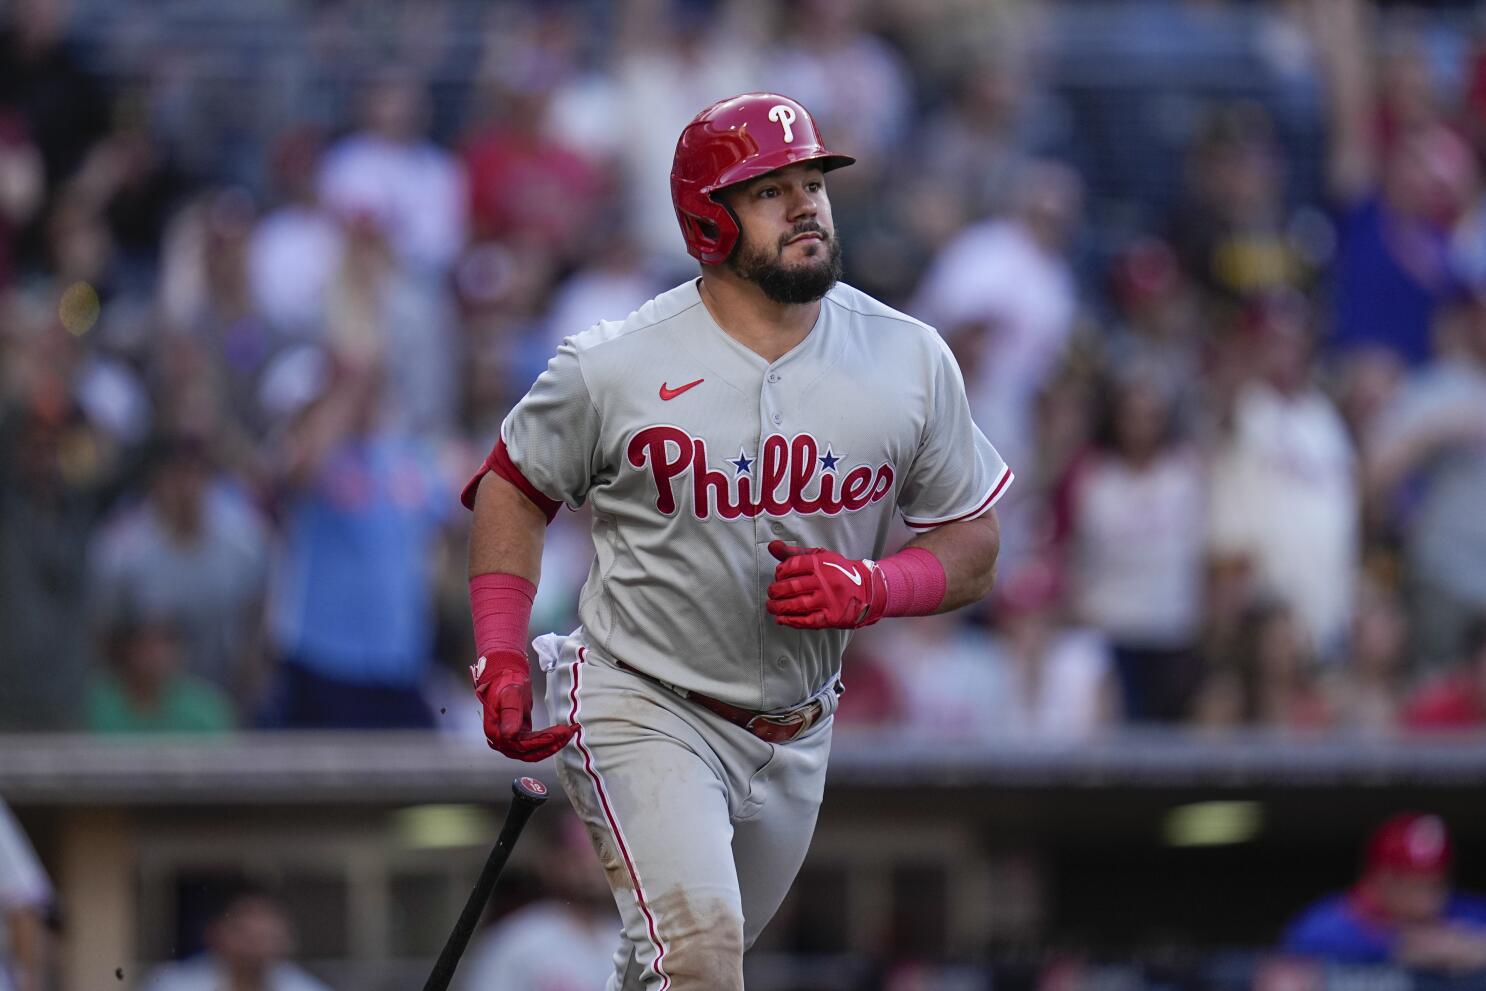 Bryce Harper's parents left Phillies game early, missed son's walk